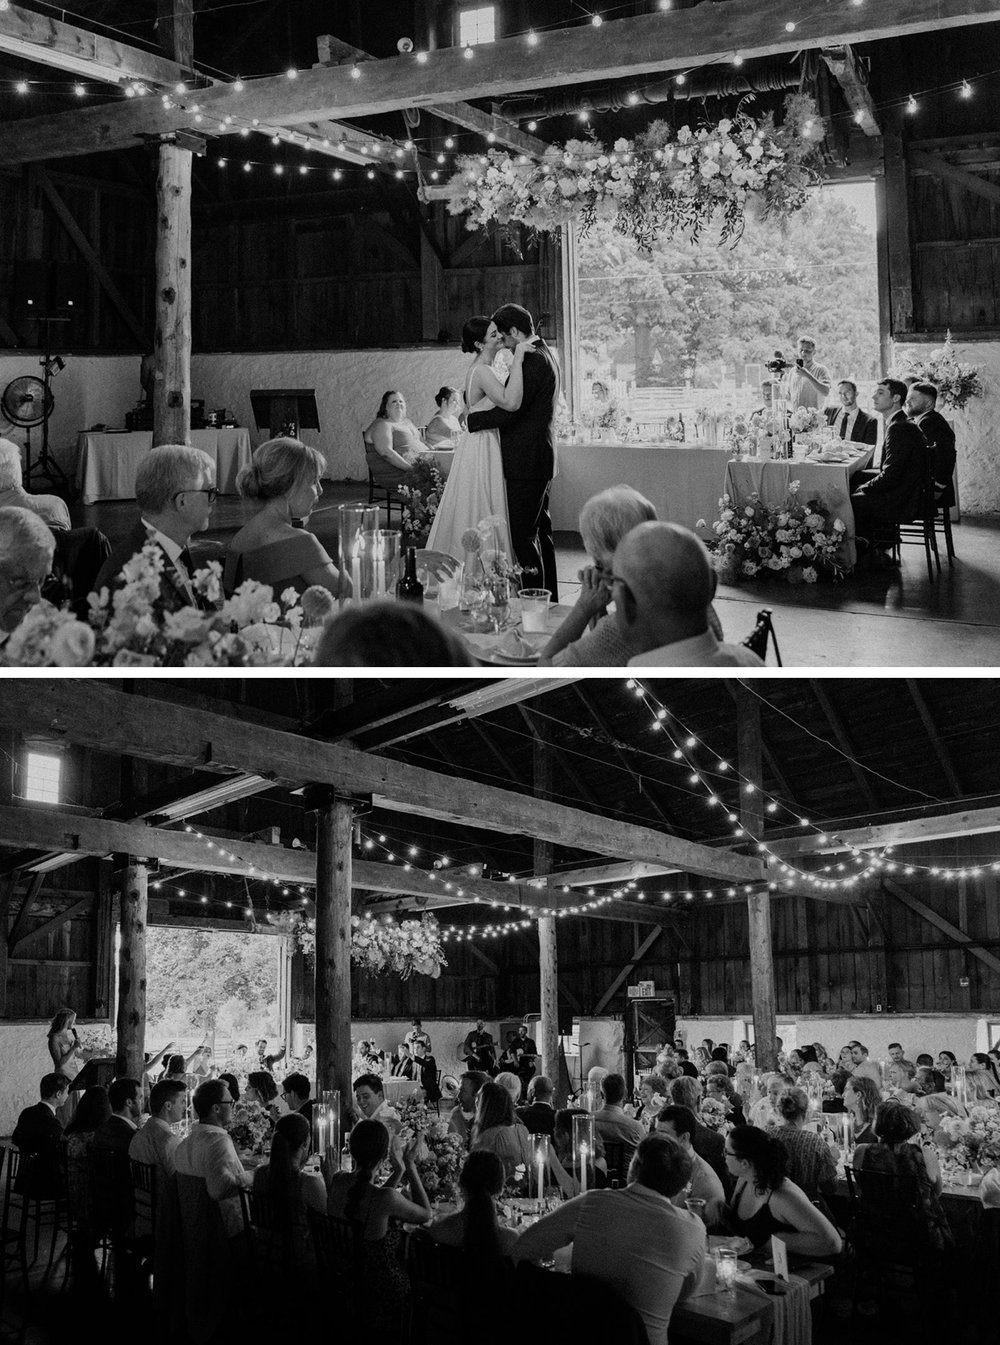 Wedding reception in the Big Barn at Ball's Falls Conservation Area